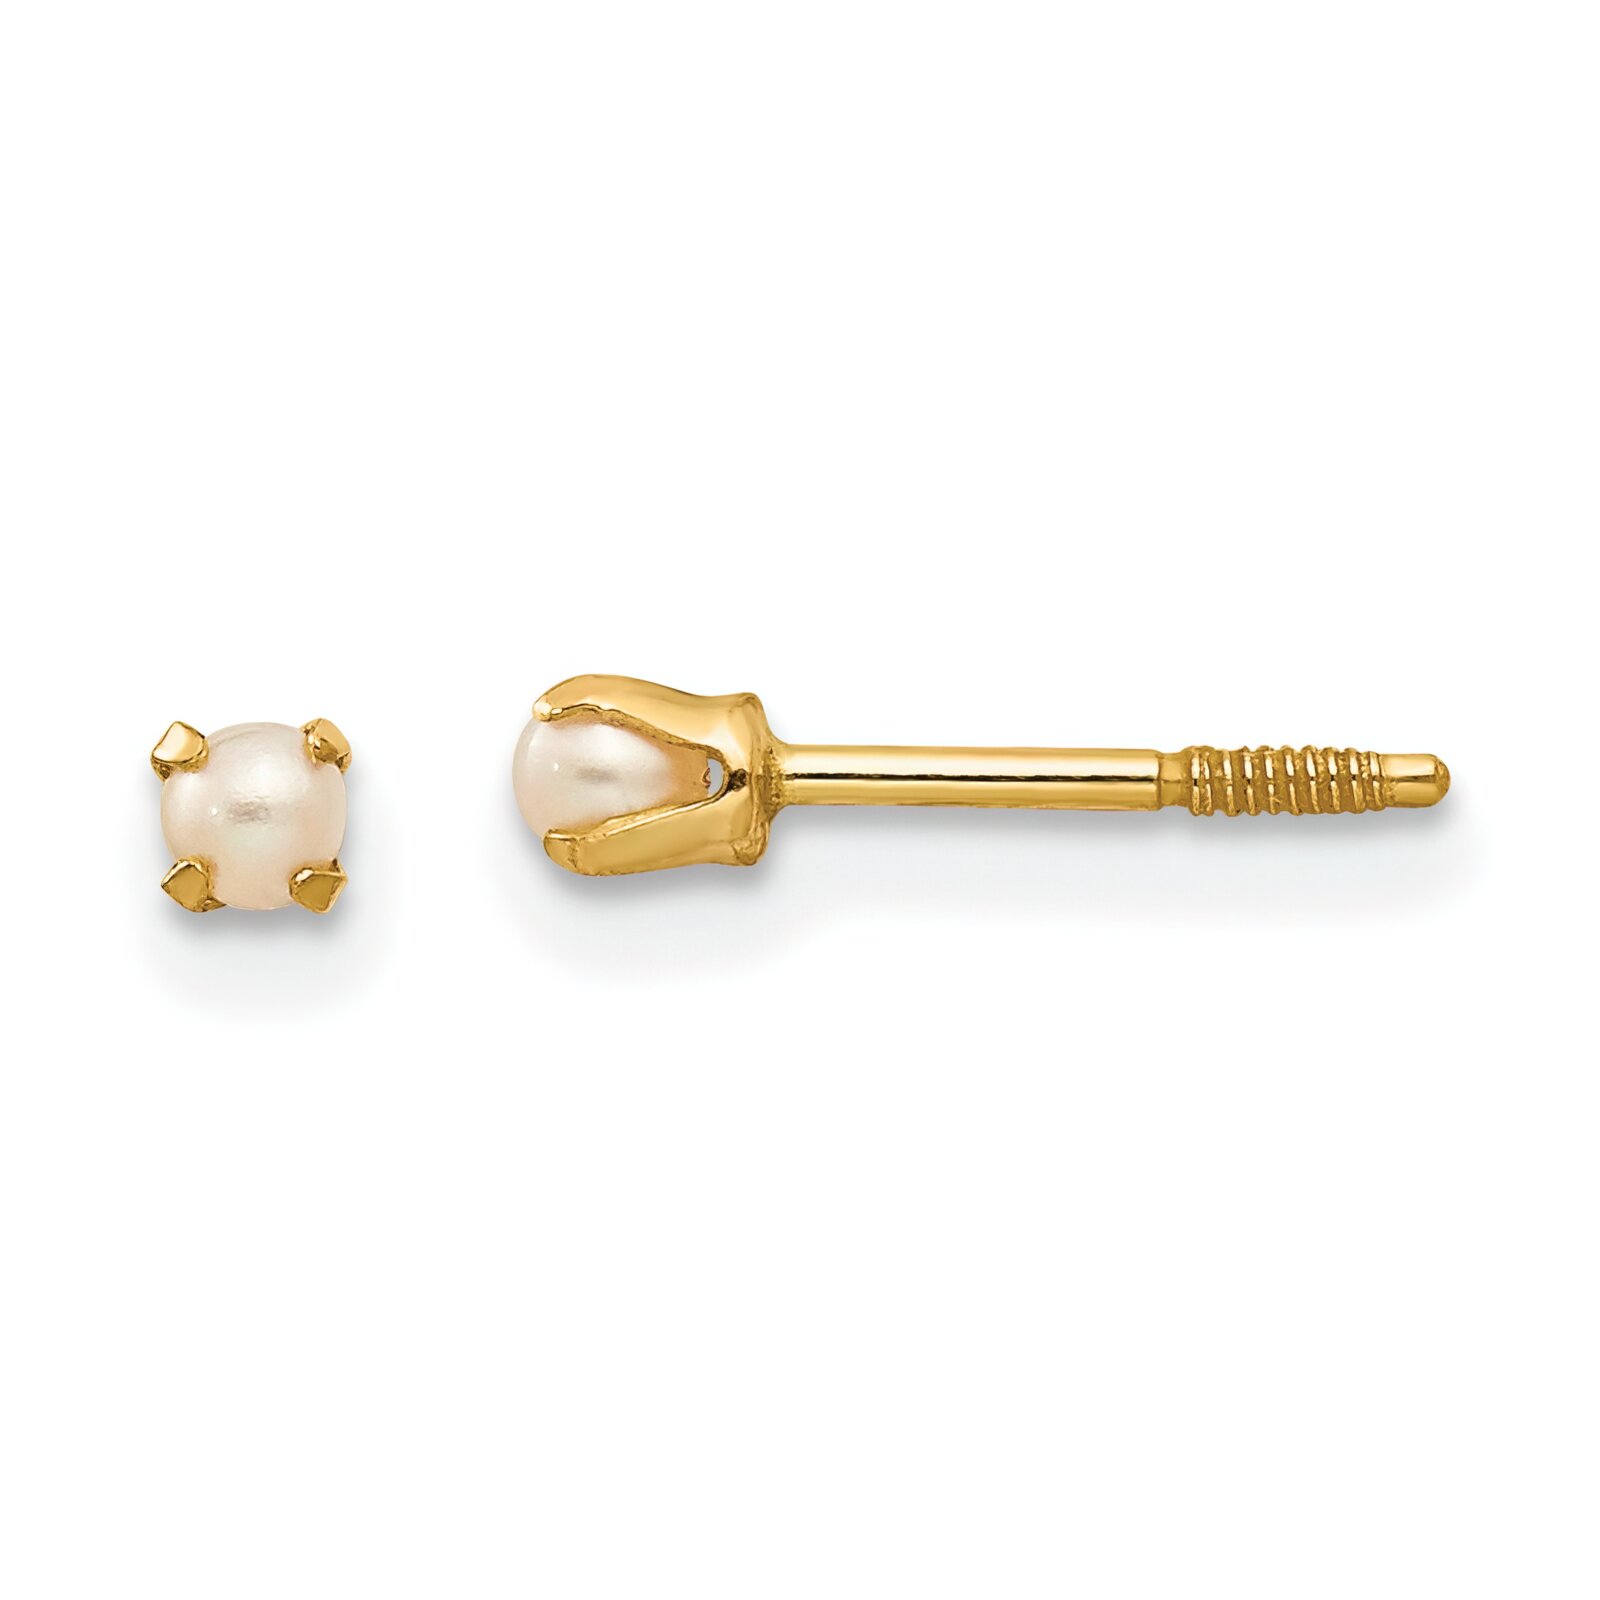 Findingking 14K Yellow Gold Baby Cultured Pearl Earrings Jewelry